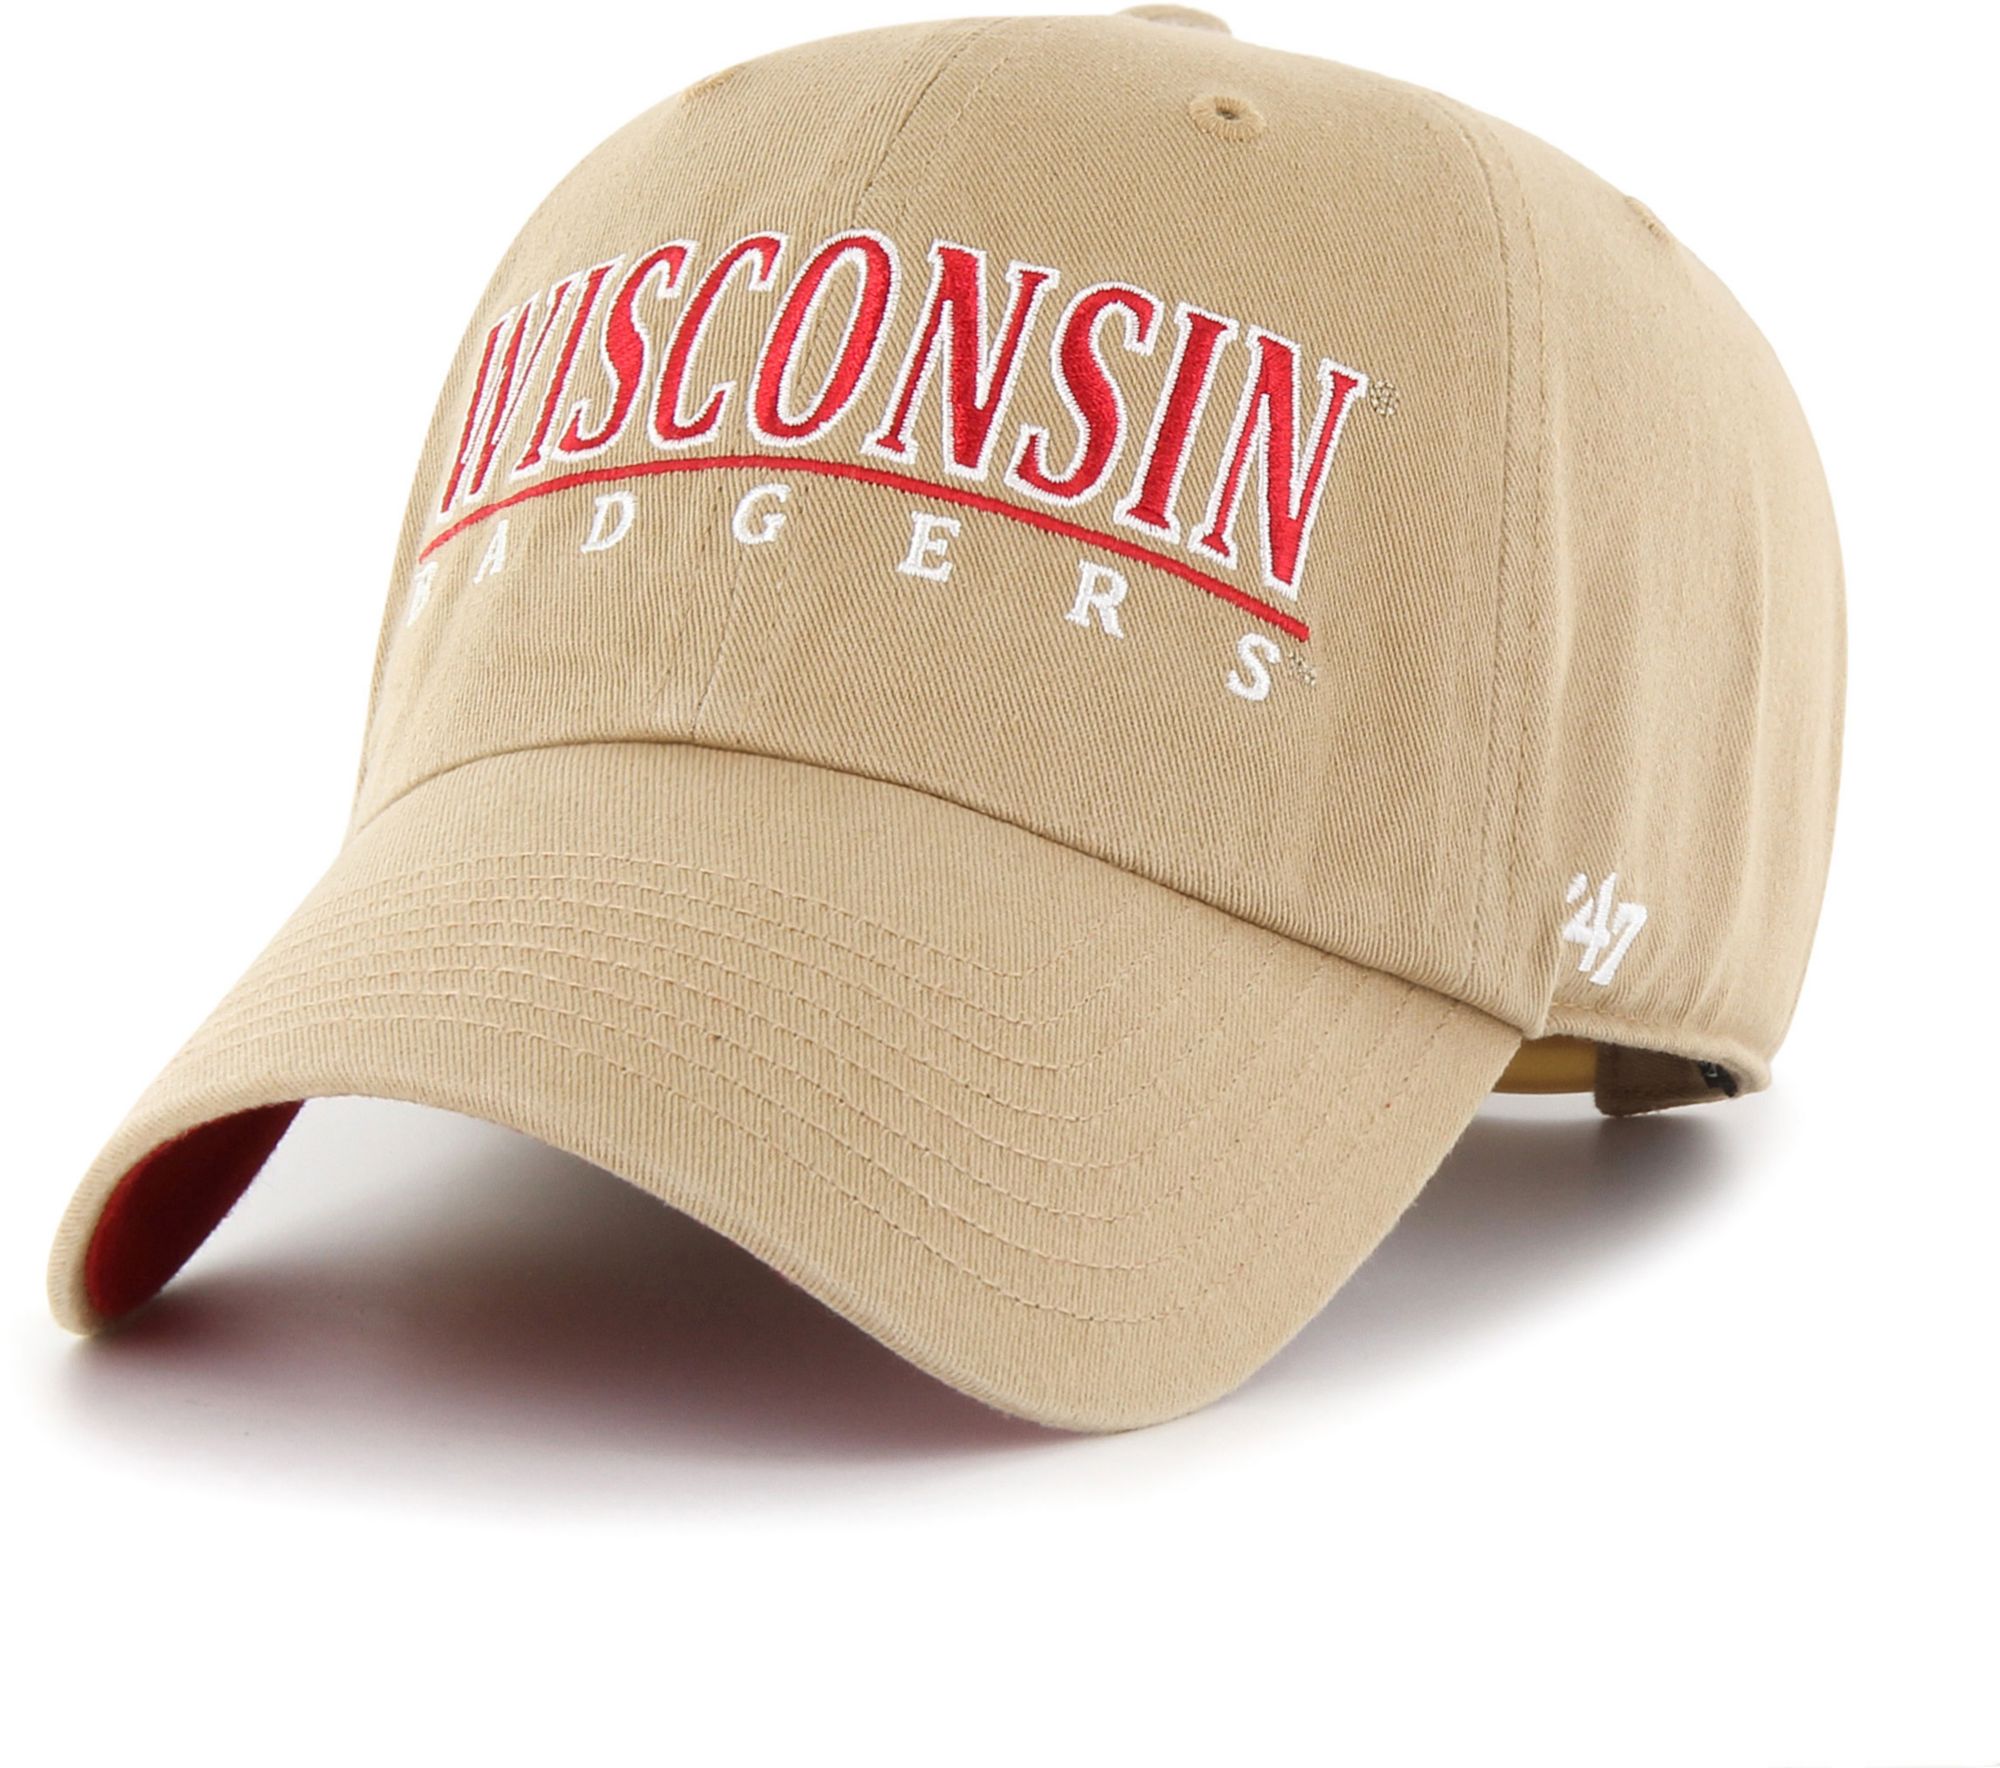 '47 ‘47 WISCONSIN BADGERS KHAKI DISTRICT CLEAN UP ADJUSTABLE HAT INTERNATIONAL SHIPPING